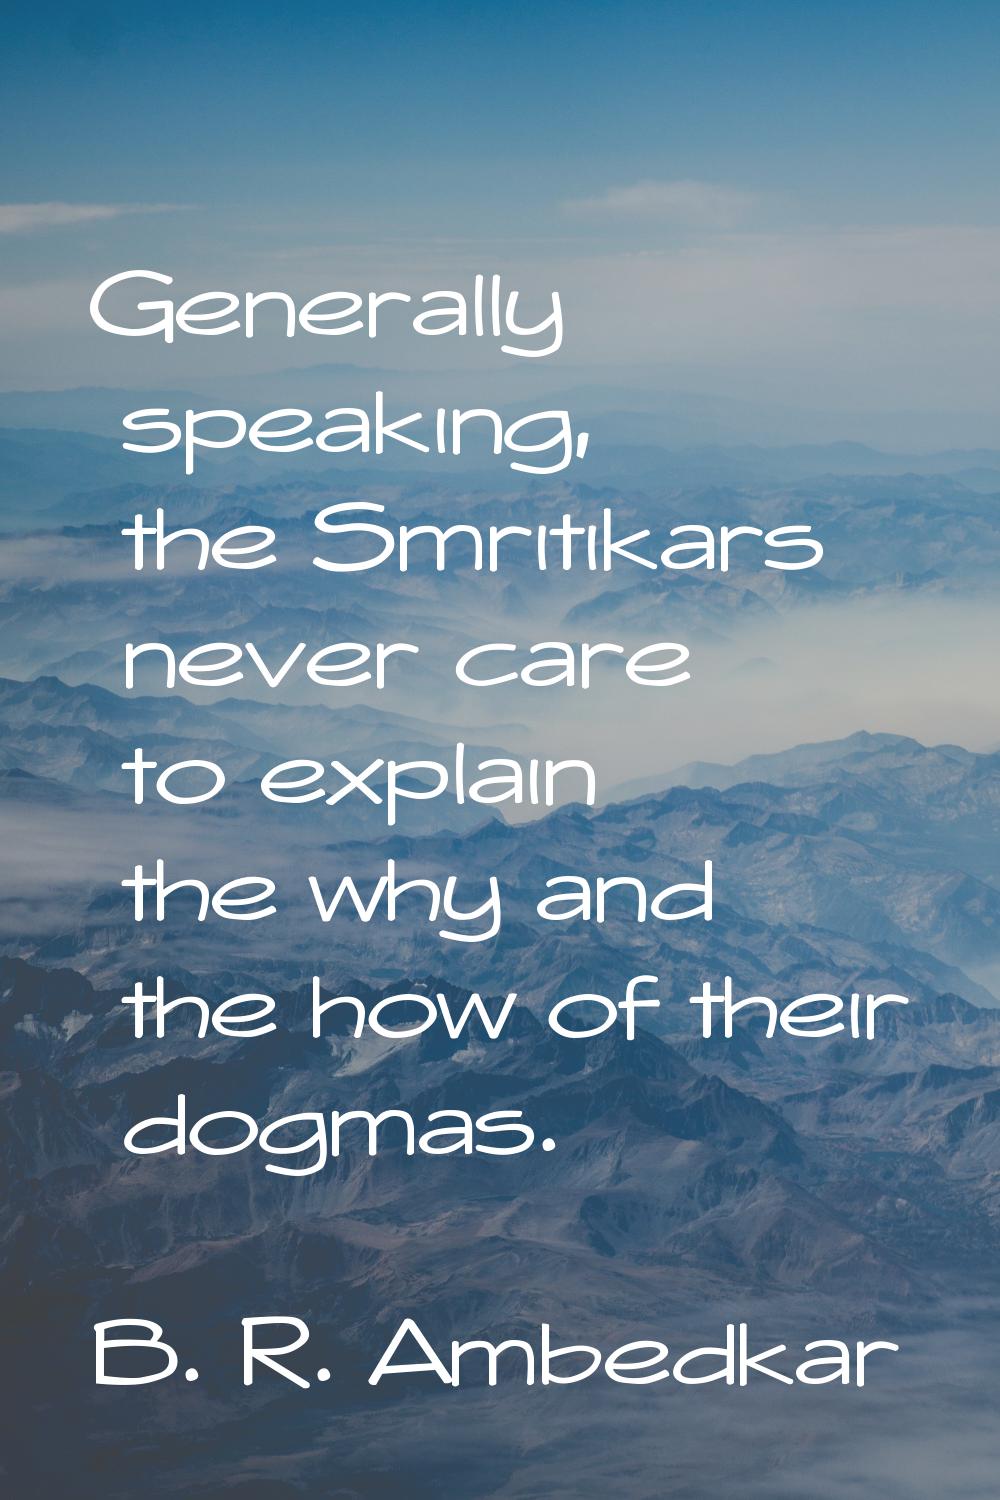 Generally speaking, the Smritikars never care to explain the why and the how of their dogmas.